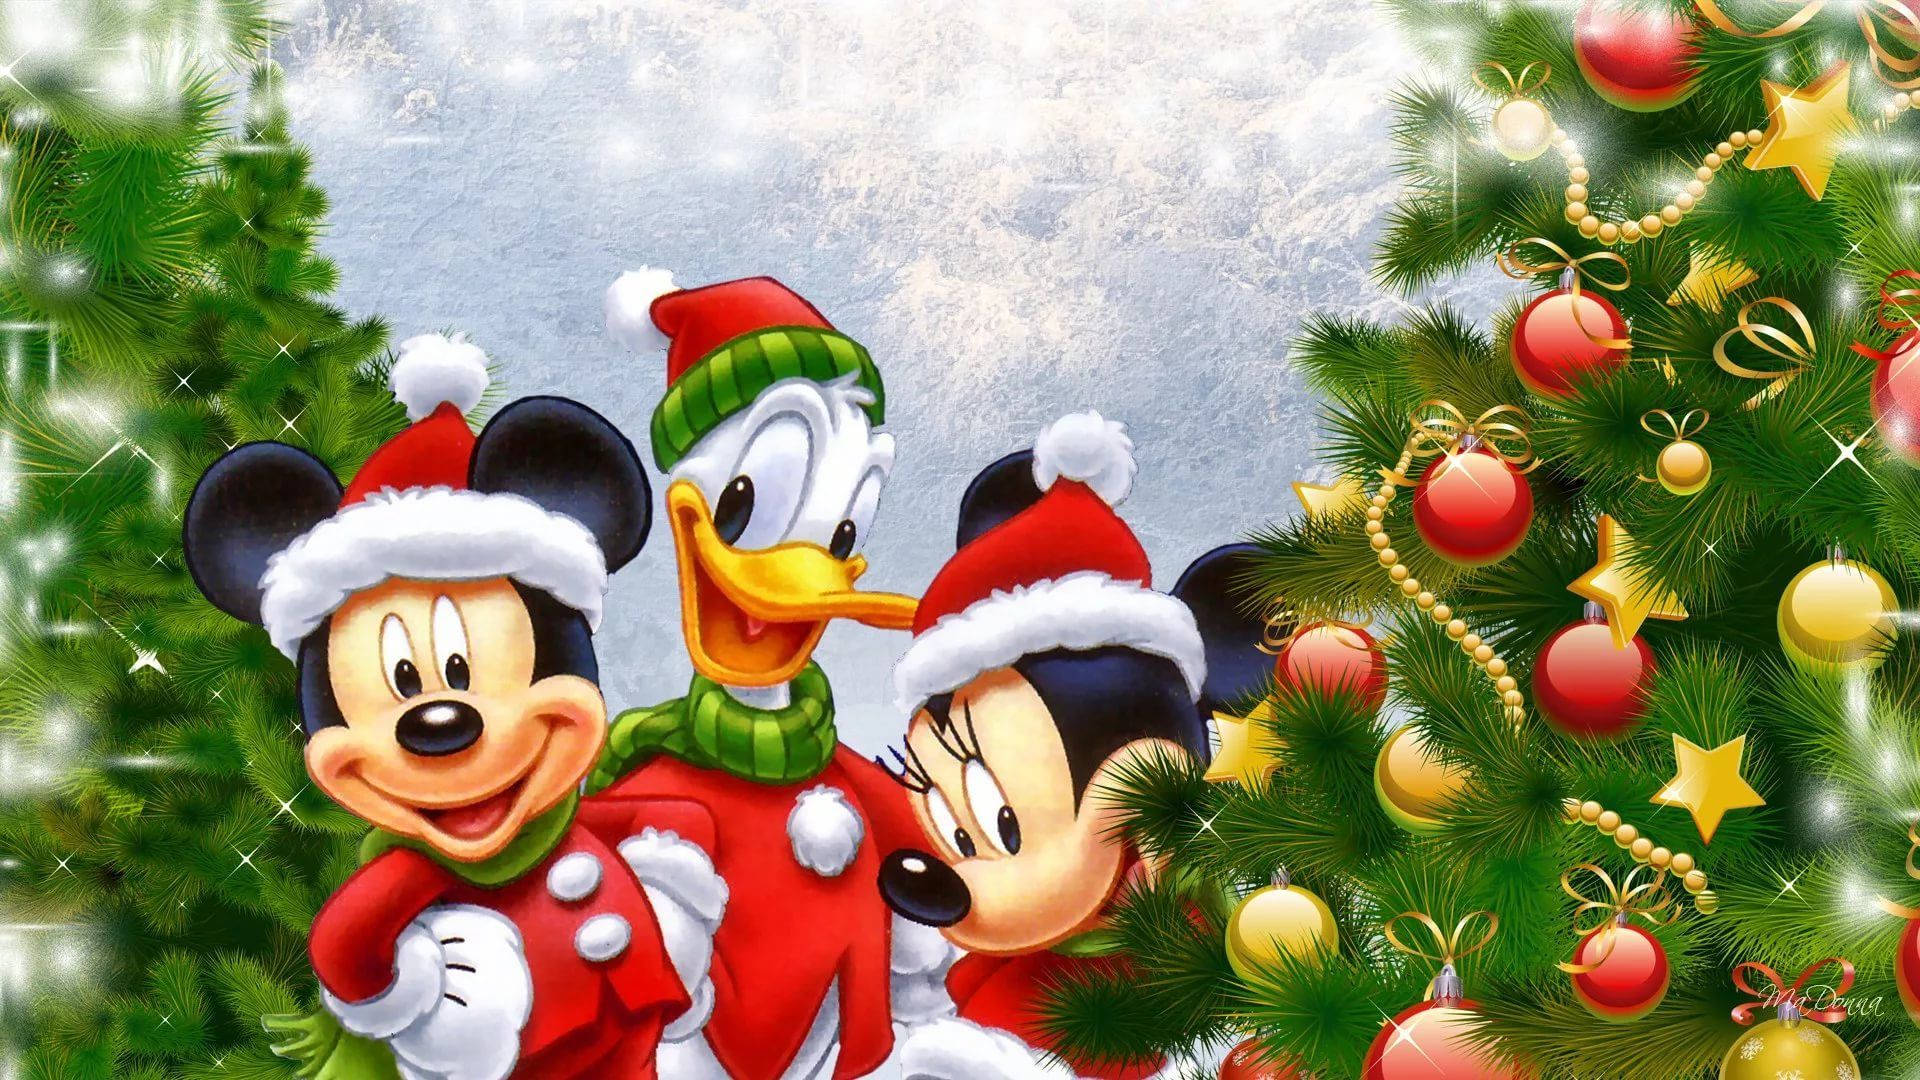 Disney 1920x1080 Hd Mickey Mouse And Friends Christmas Trees Wallpaper